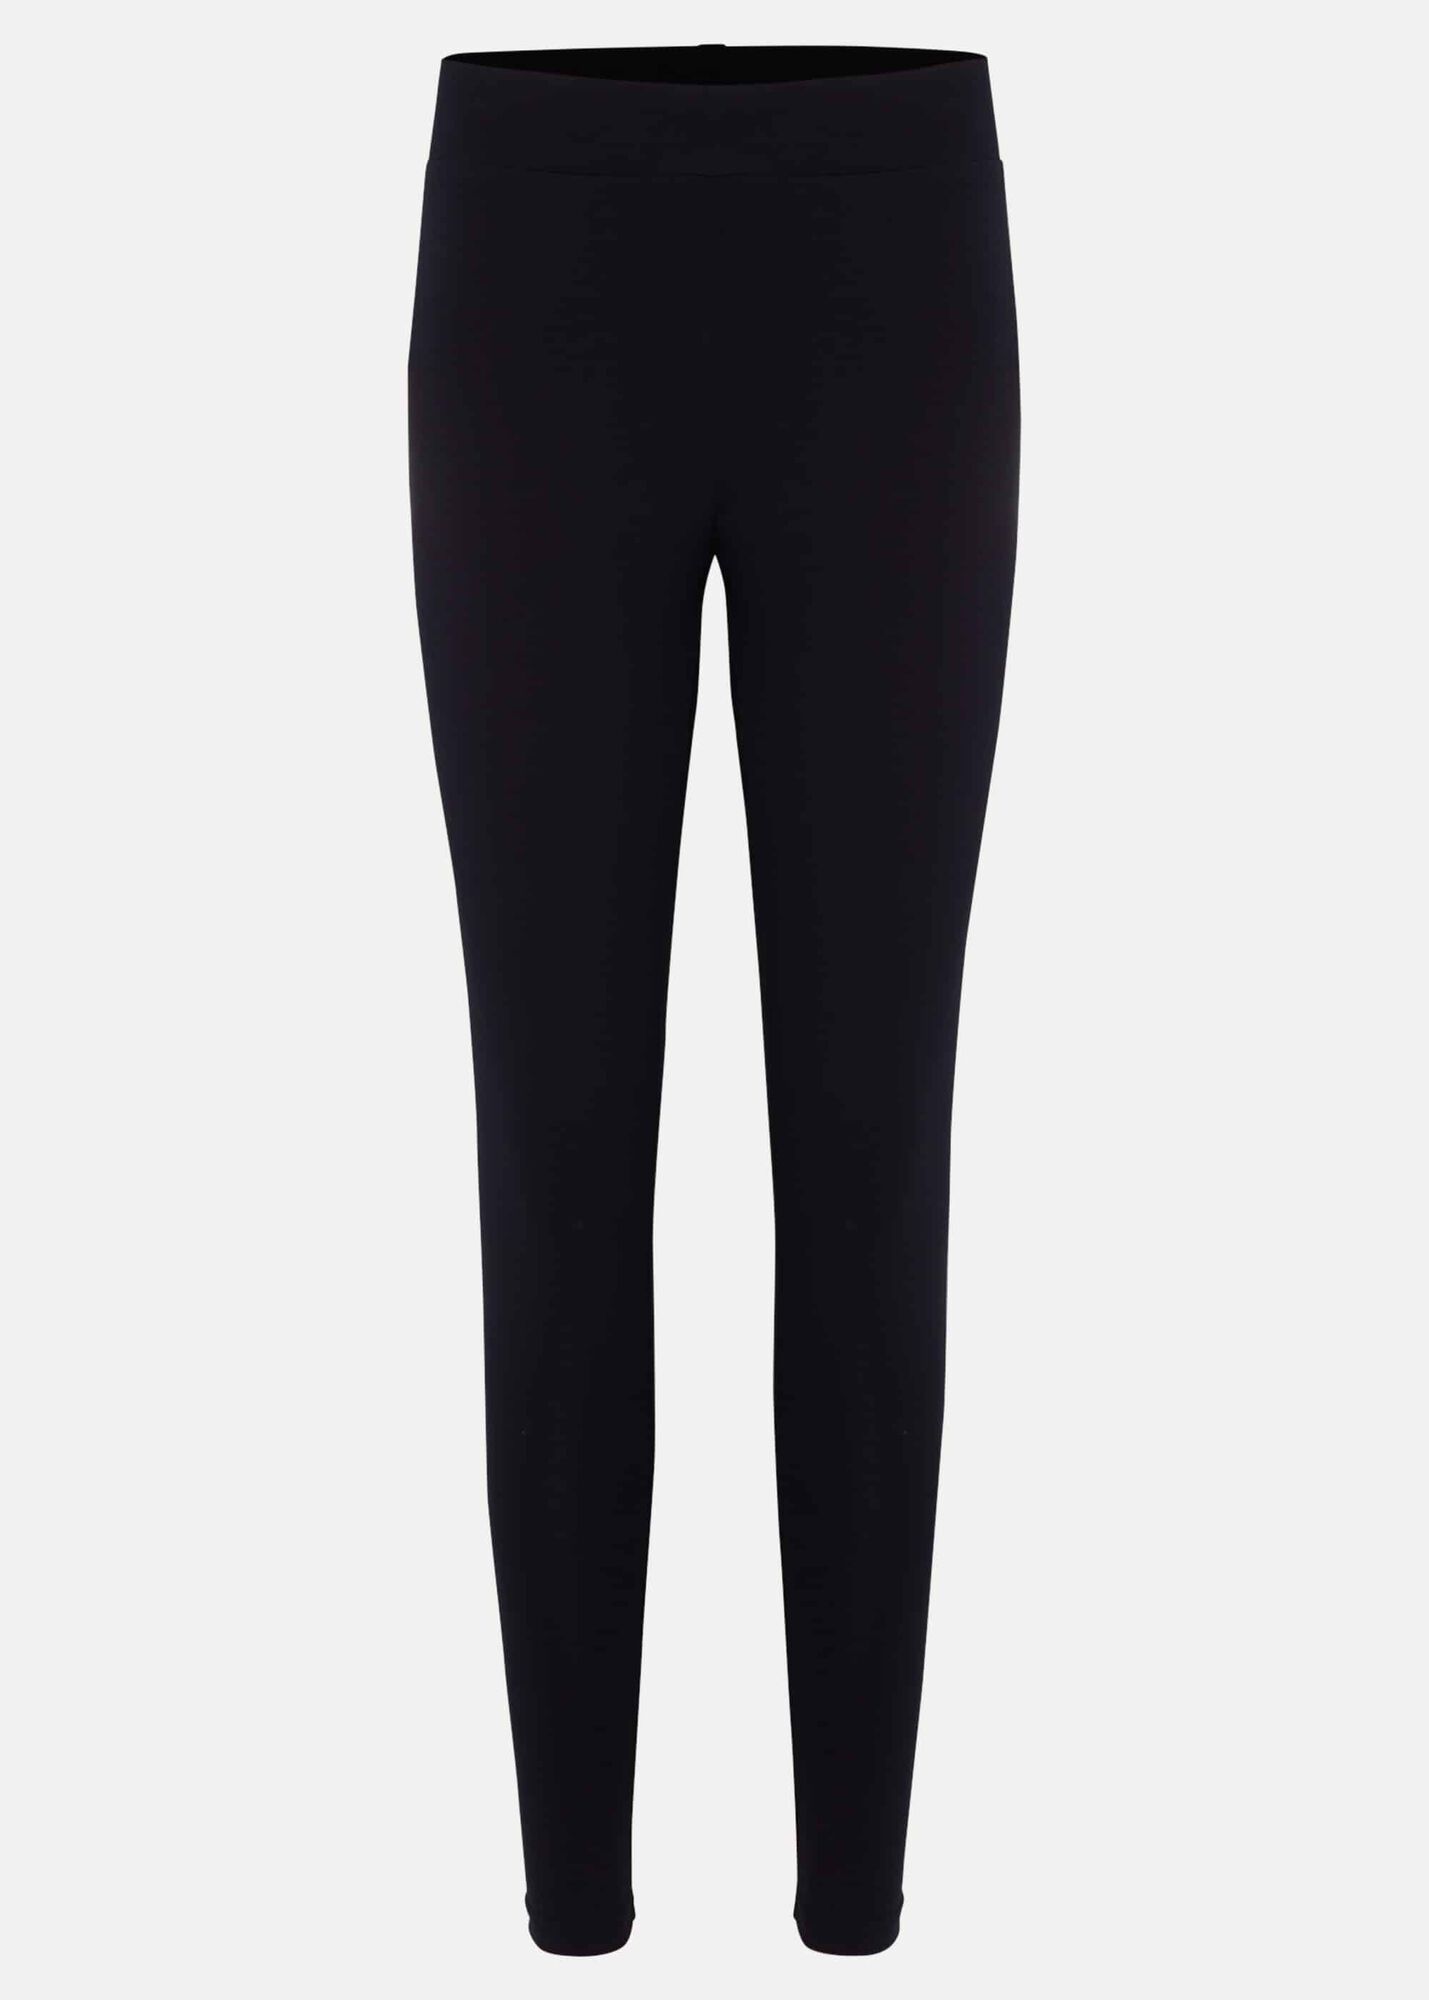 Lizzie Leggings | Phase Eight